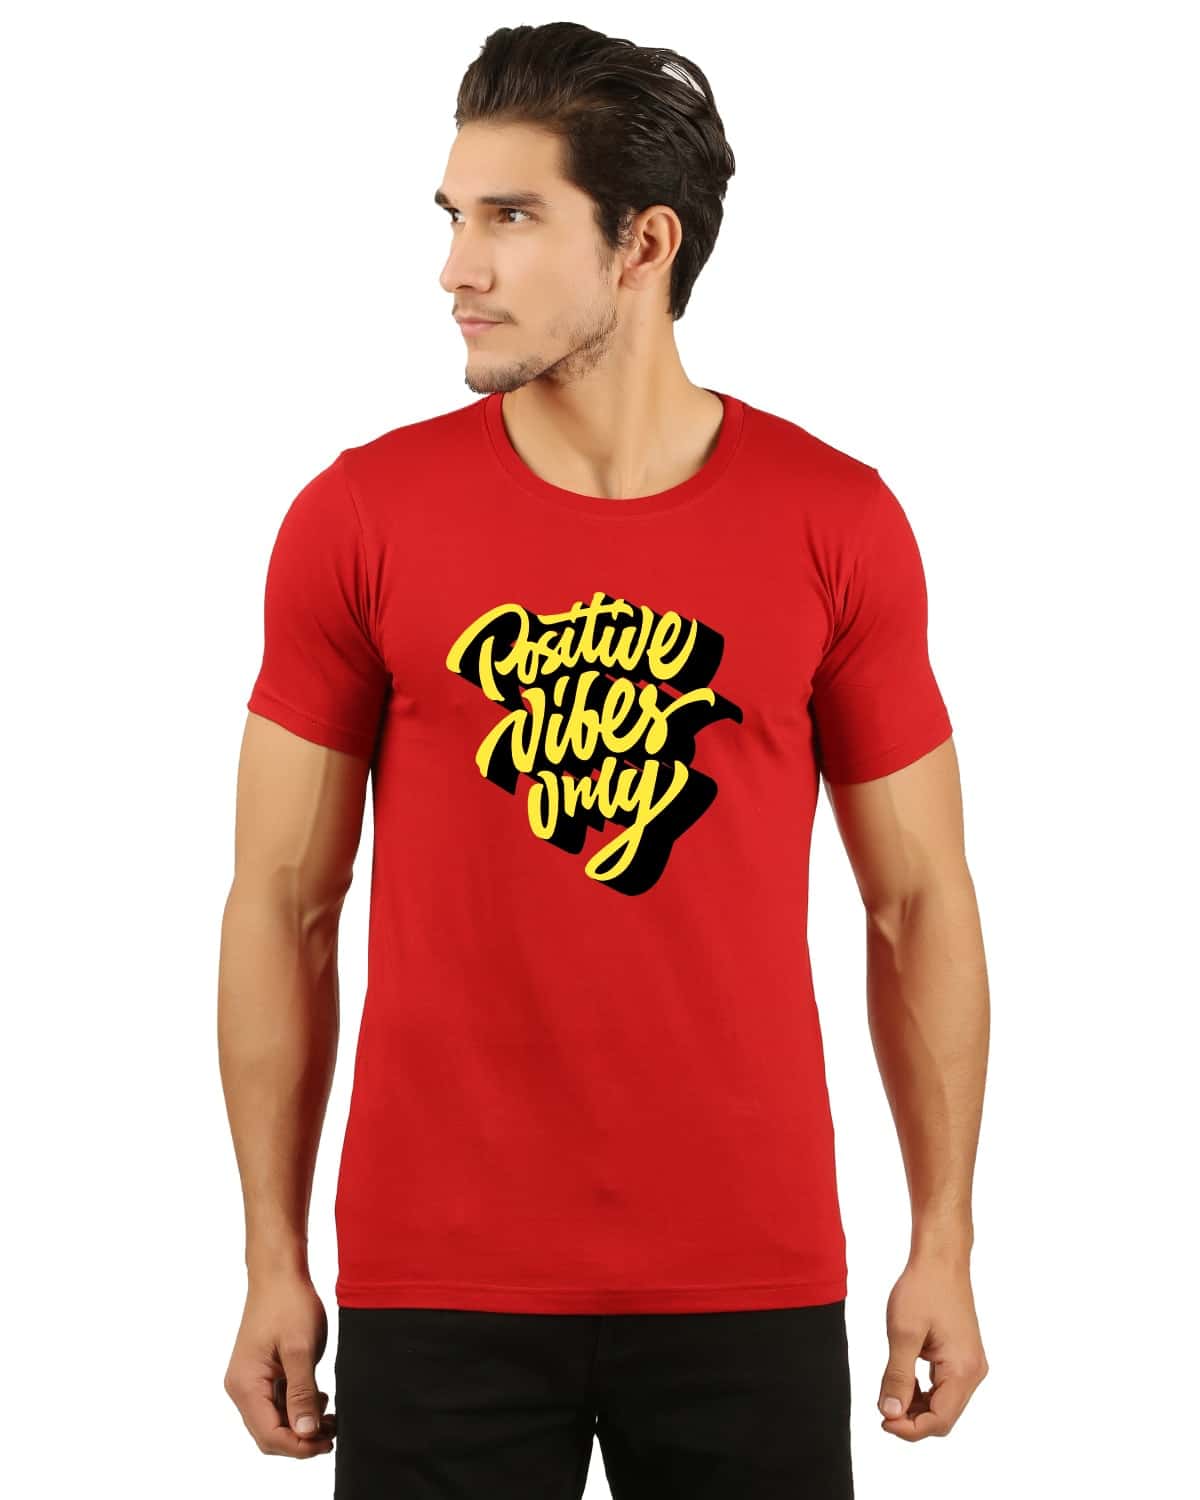 Positive Vibes Only Tshirt men jopo printed red